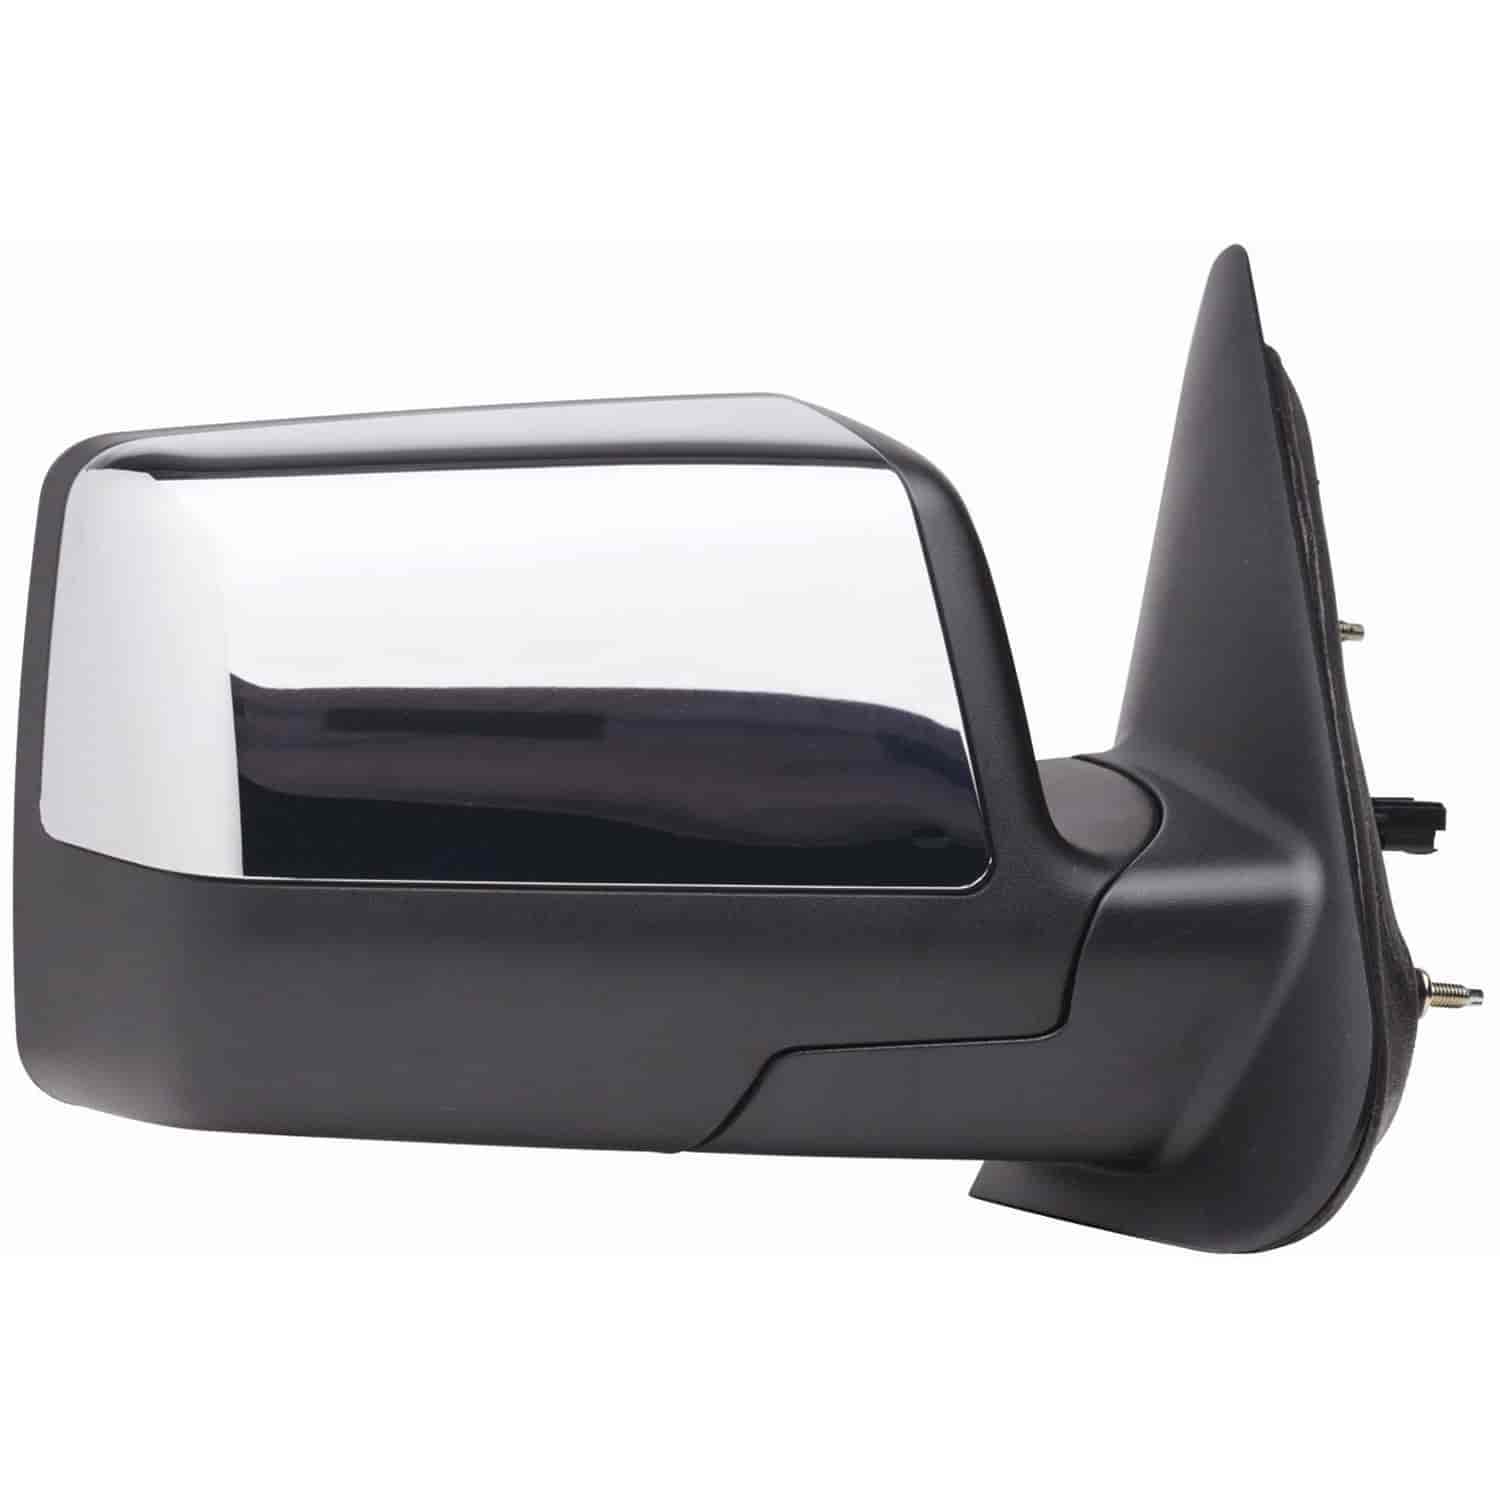 OEM Style Replacement mirror for 06-11 Ford Rangerw/chrome